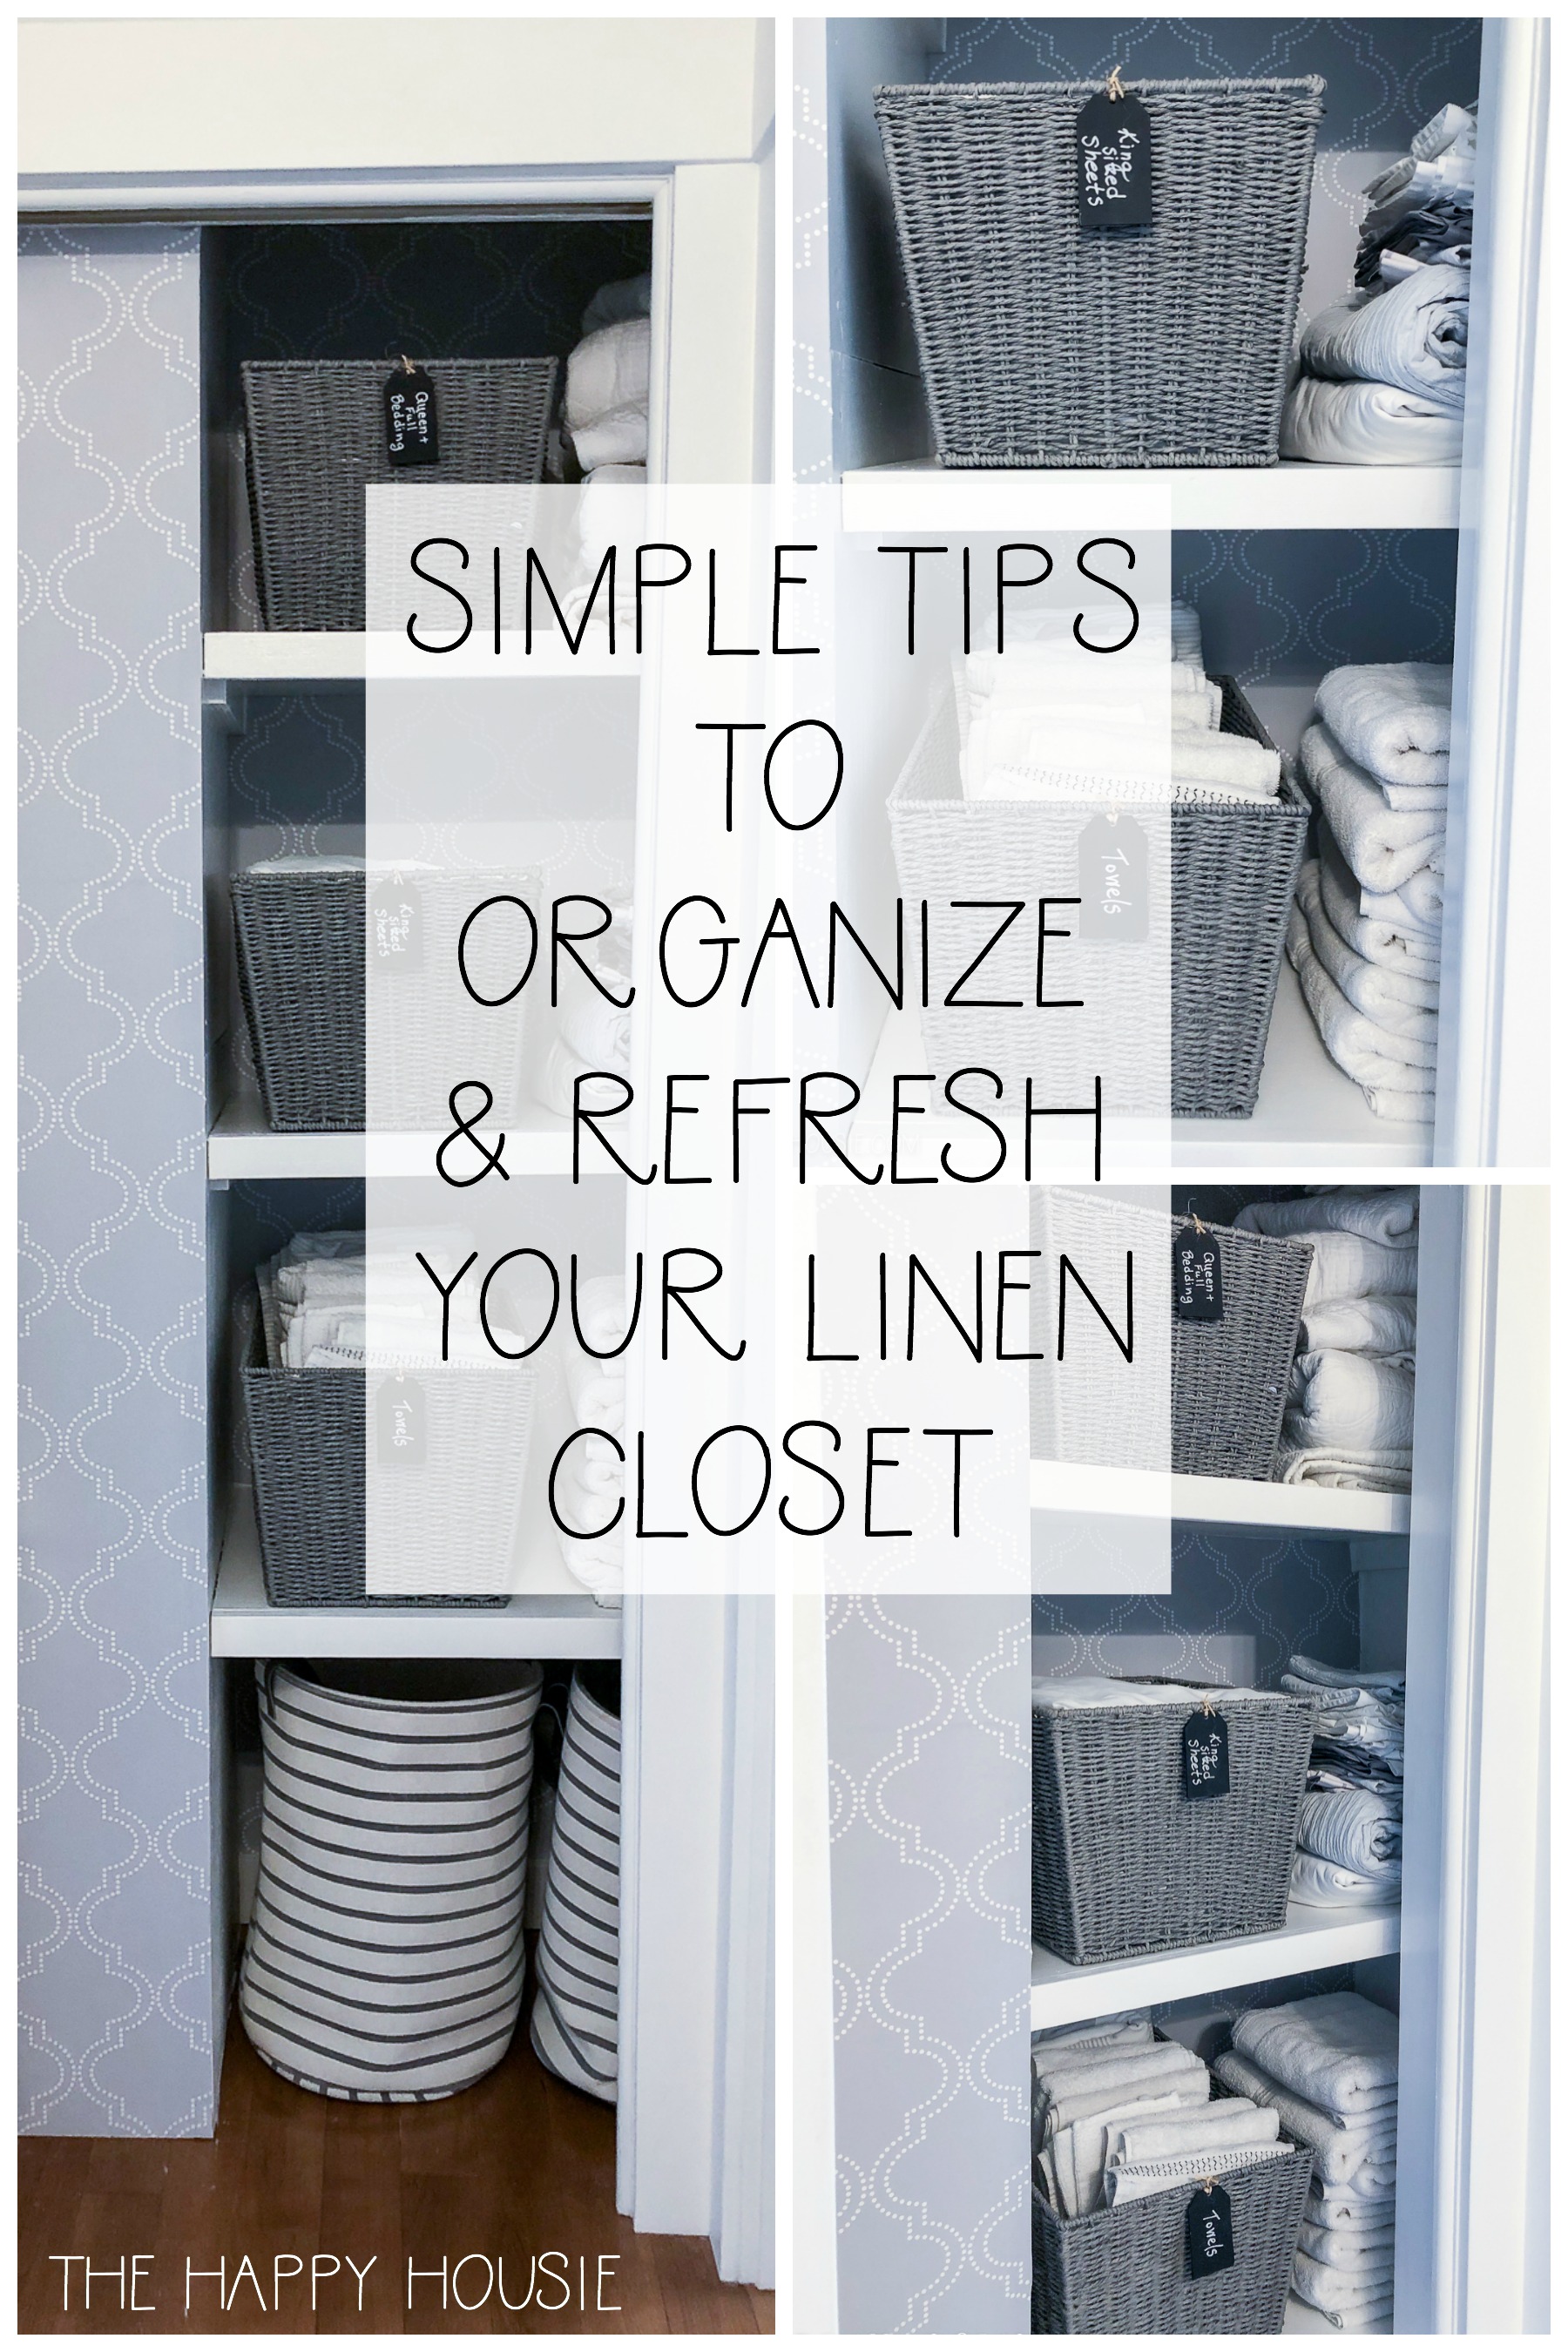 Simple Tips To Organize & Refresh Your Linen Closet poster.